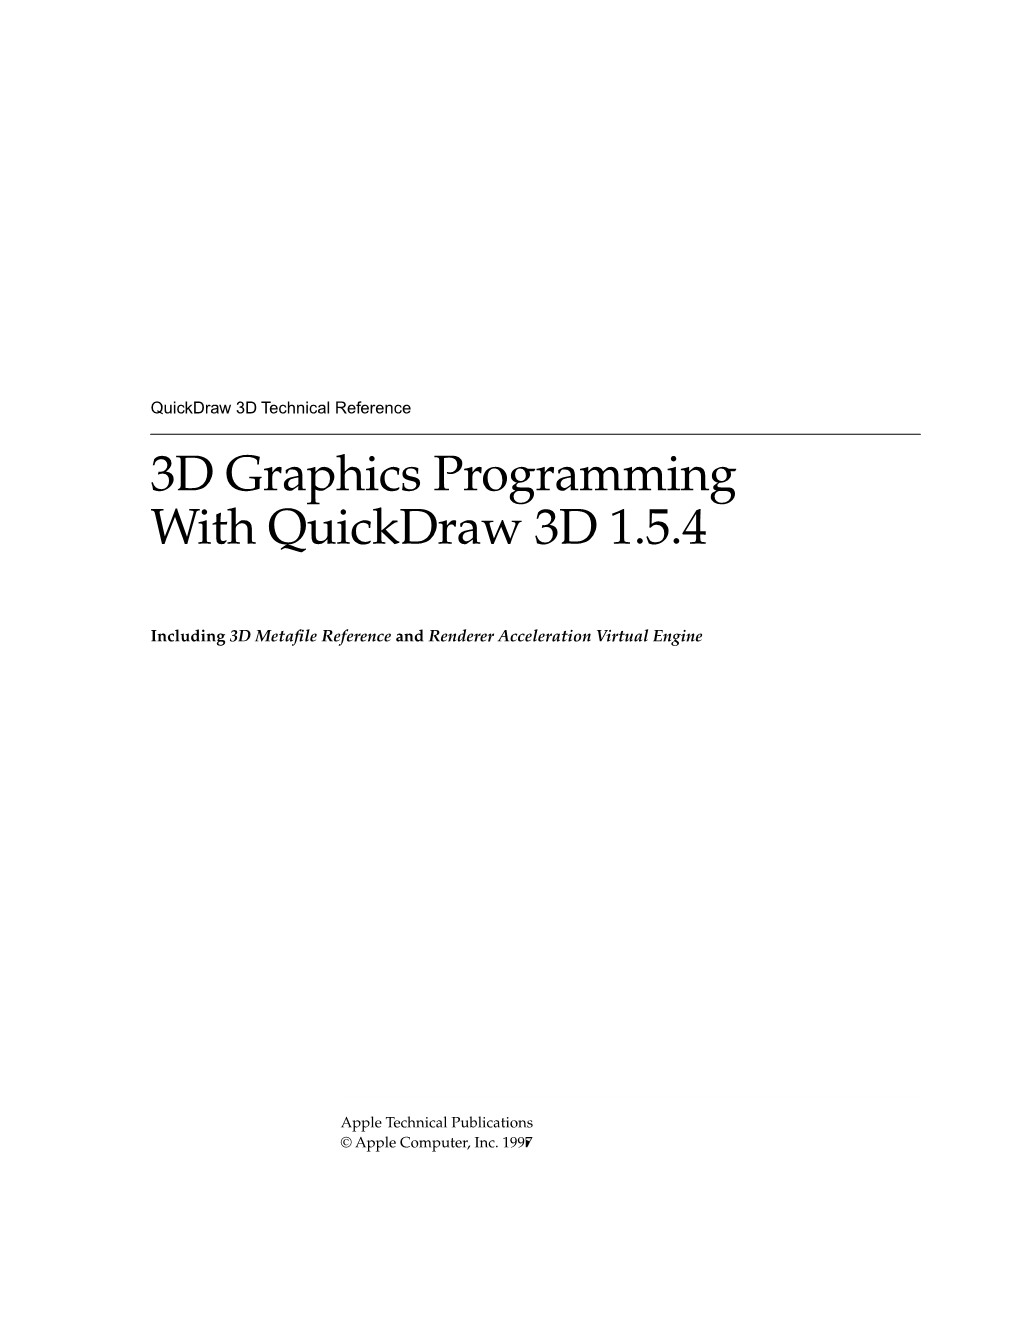 3D Graphics Programming with Quickdraw 3D 1.5.4